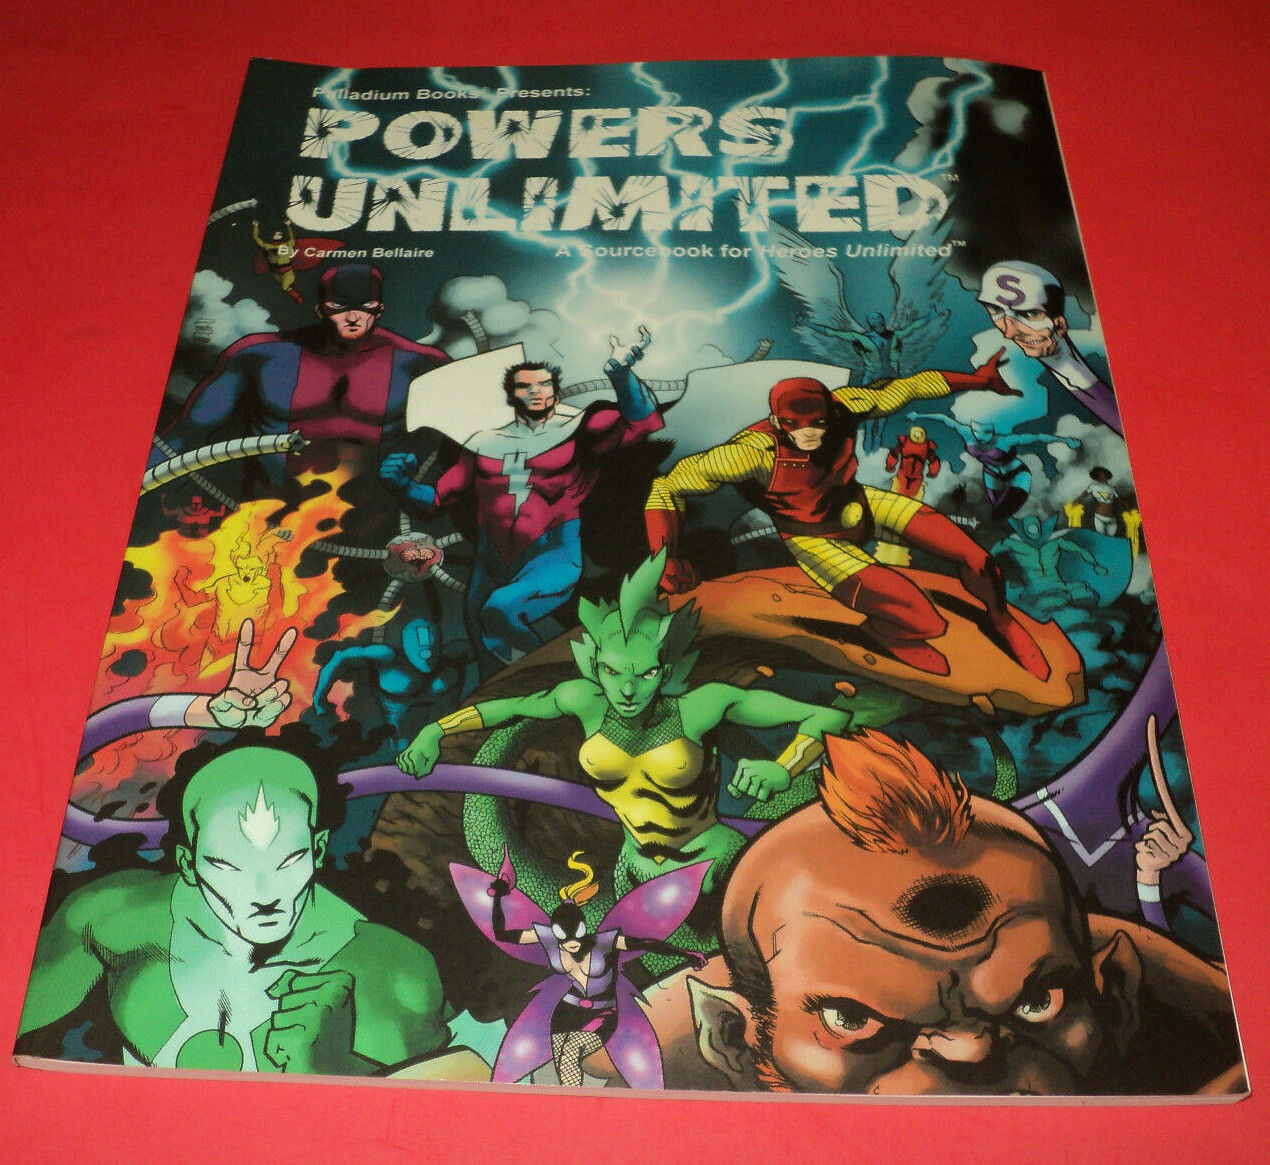 Palladium Books Presents POWERS UNLIMITED 1 ~ Sourcebook for Heroes Unlimited 